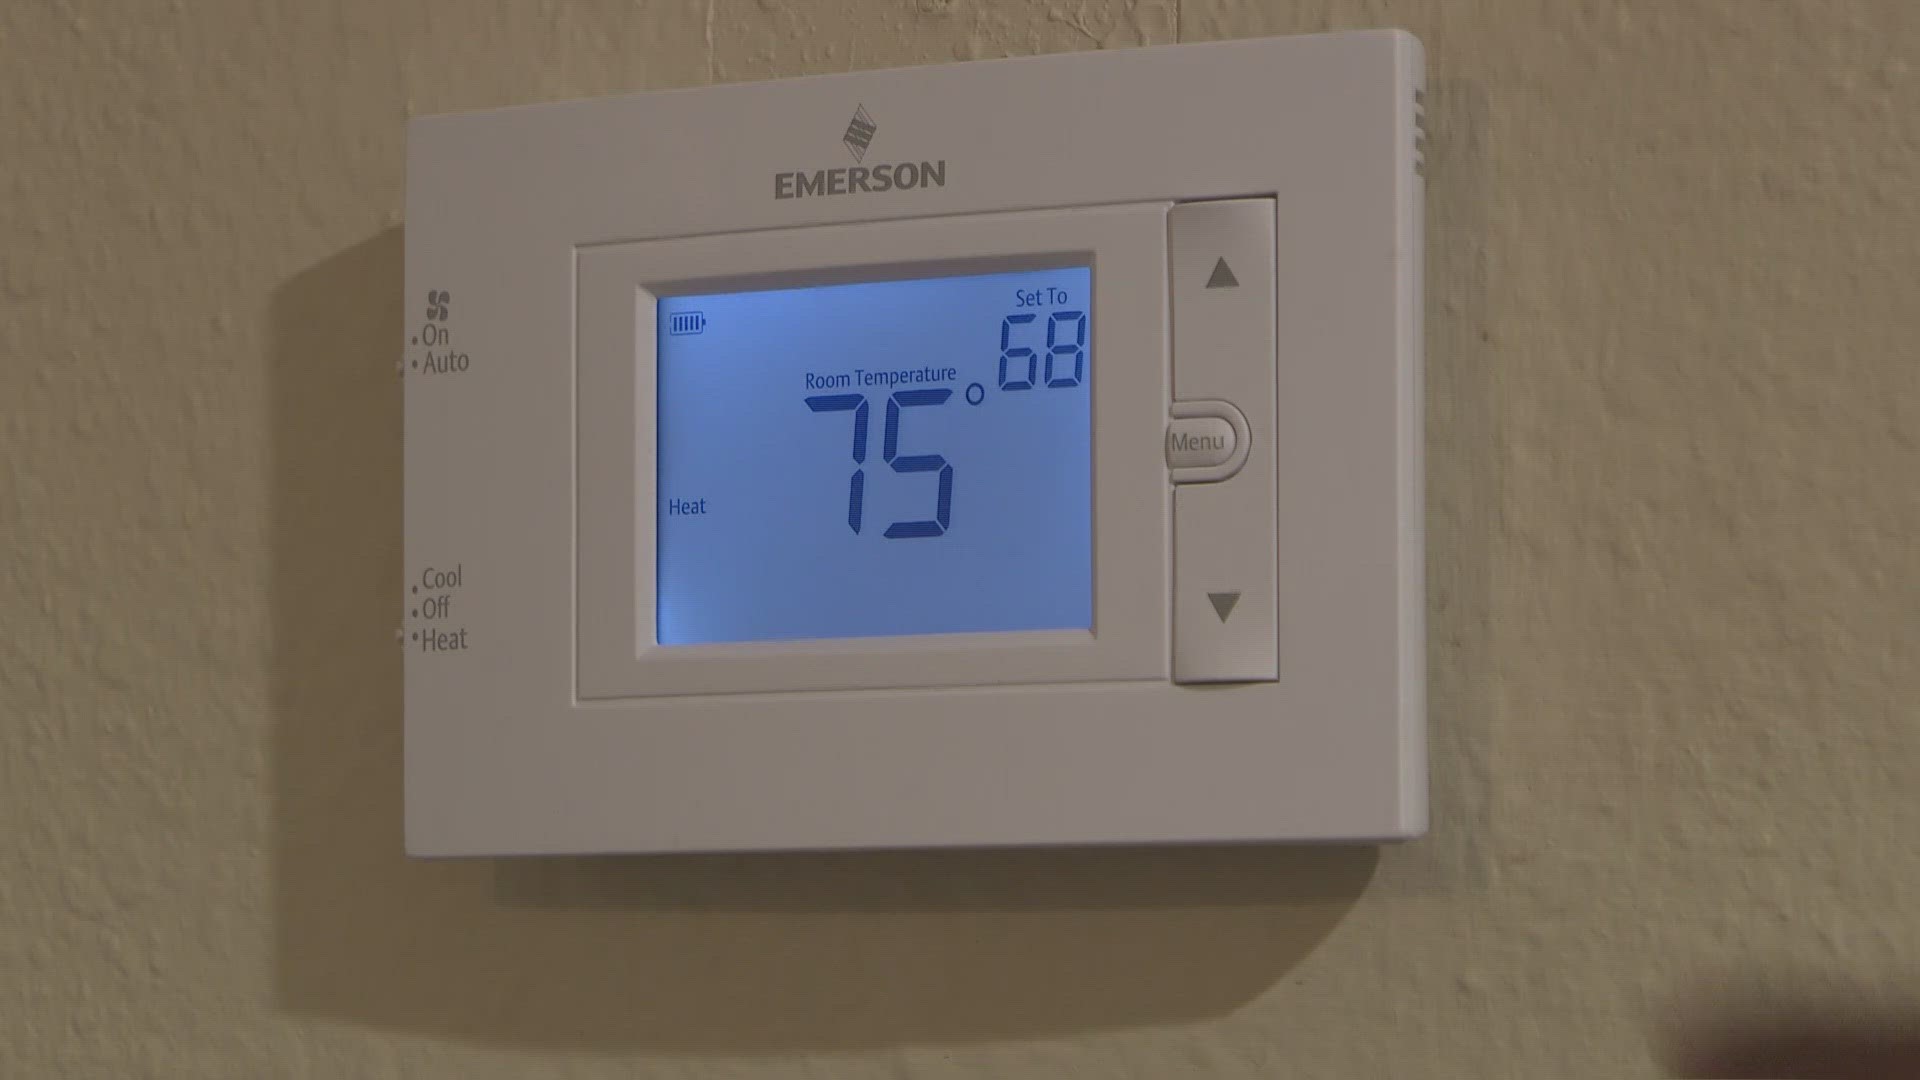 Central Texas homeowners are frustrated after seeing energy bills double, despite having fixed rates.